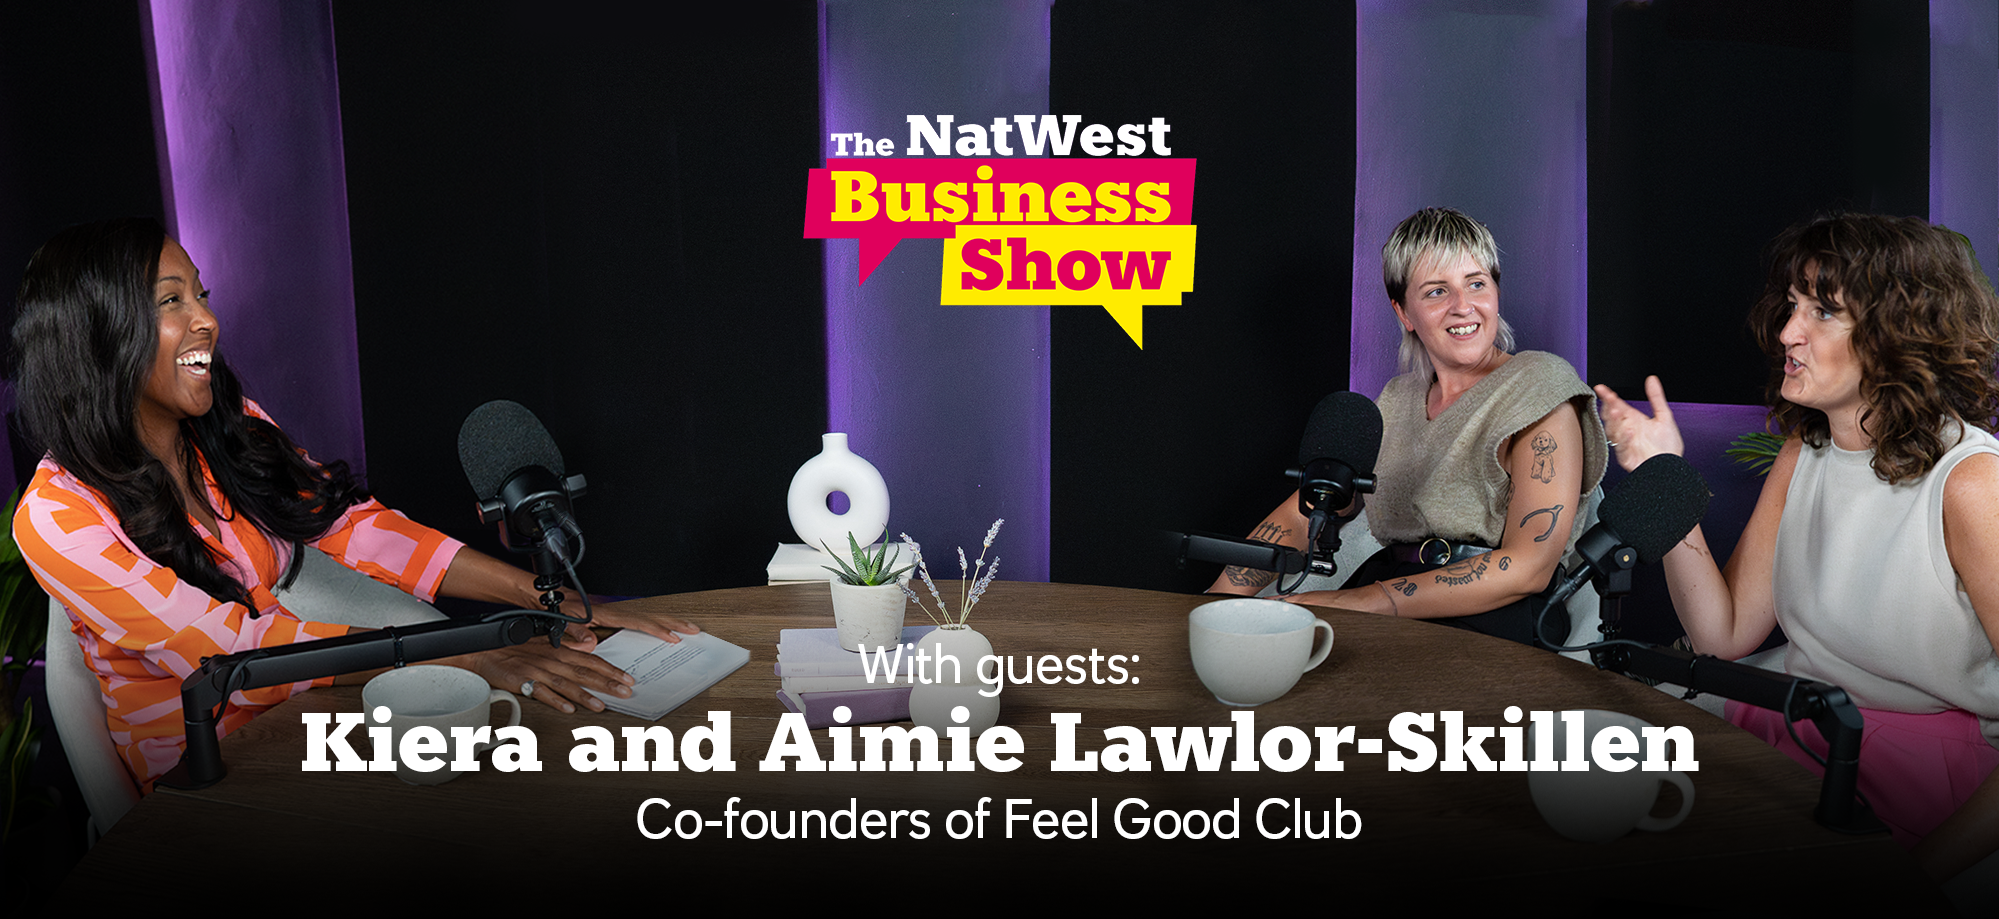 Angellica Bell with Kiera and Aime Lawlor-Skillen on the NatWest Business Show